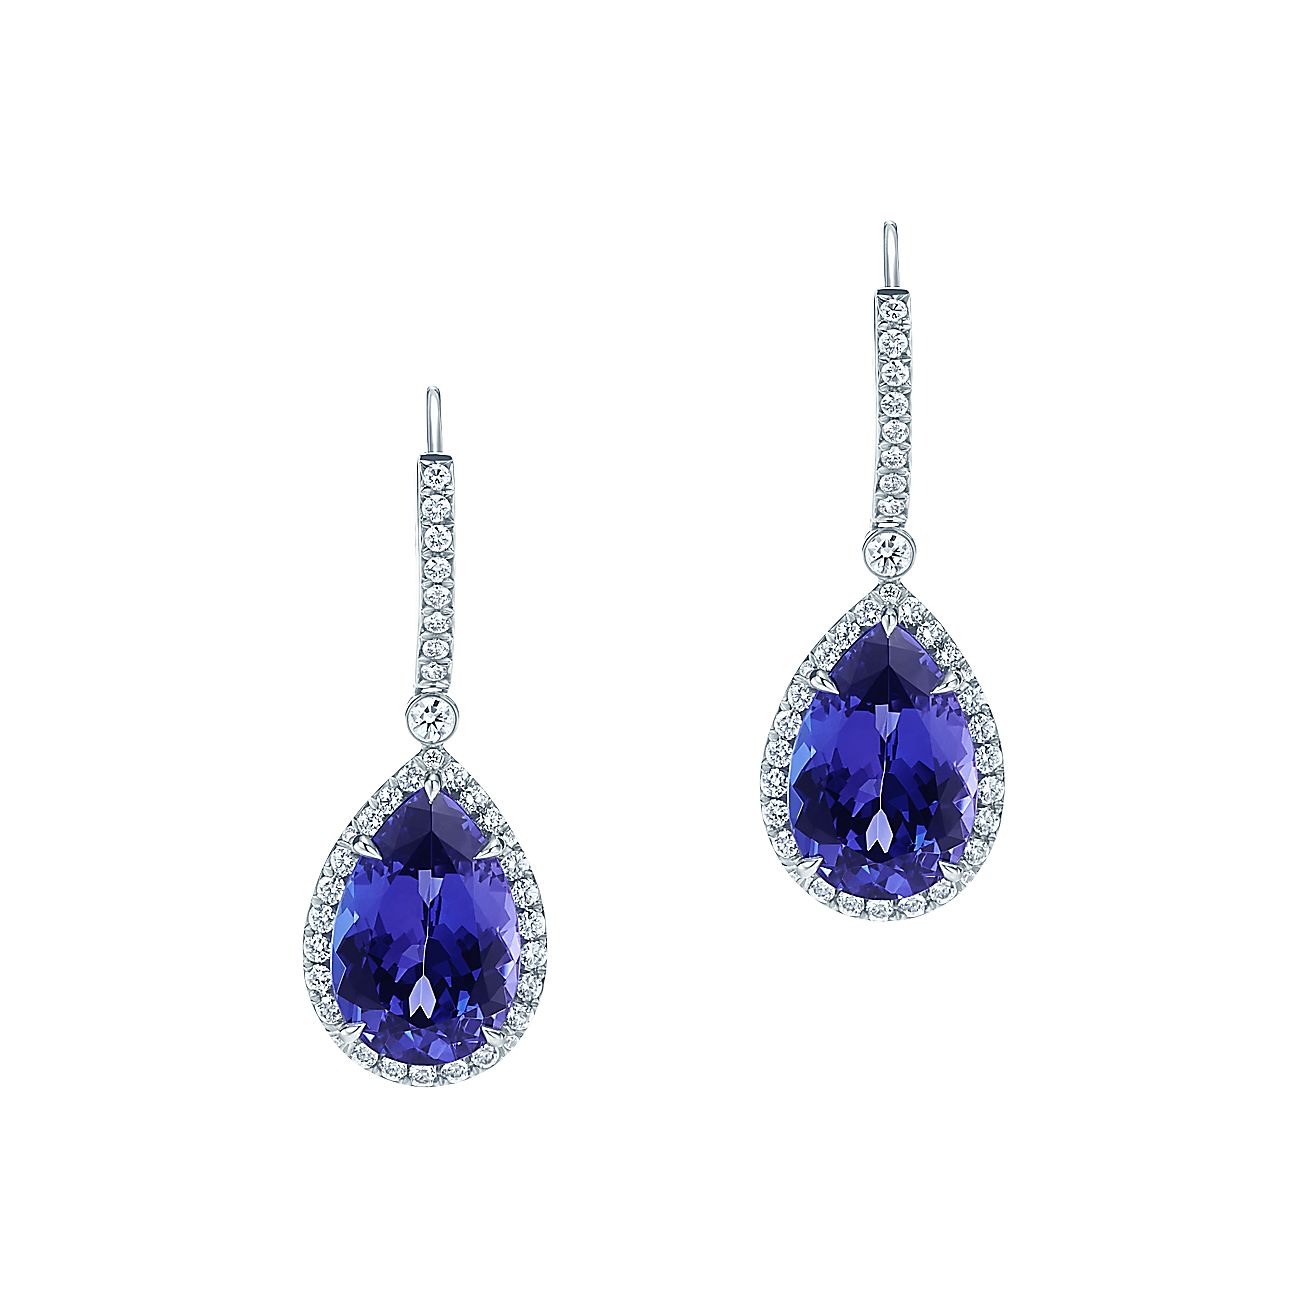 Tiffany Soleste® earrings in platinum with tanzanites and diamonds ...